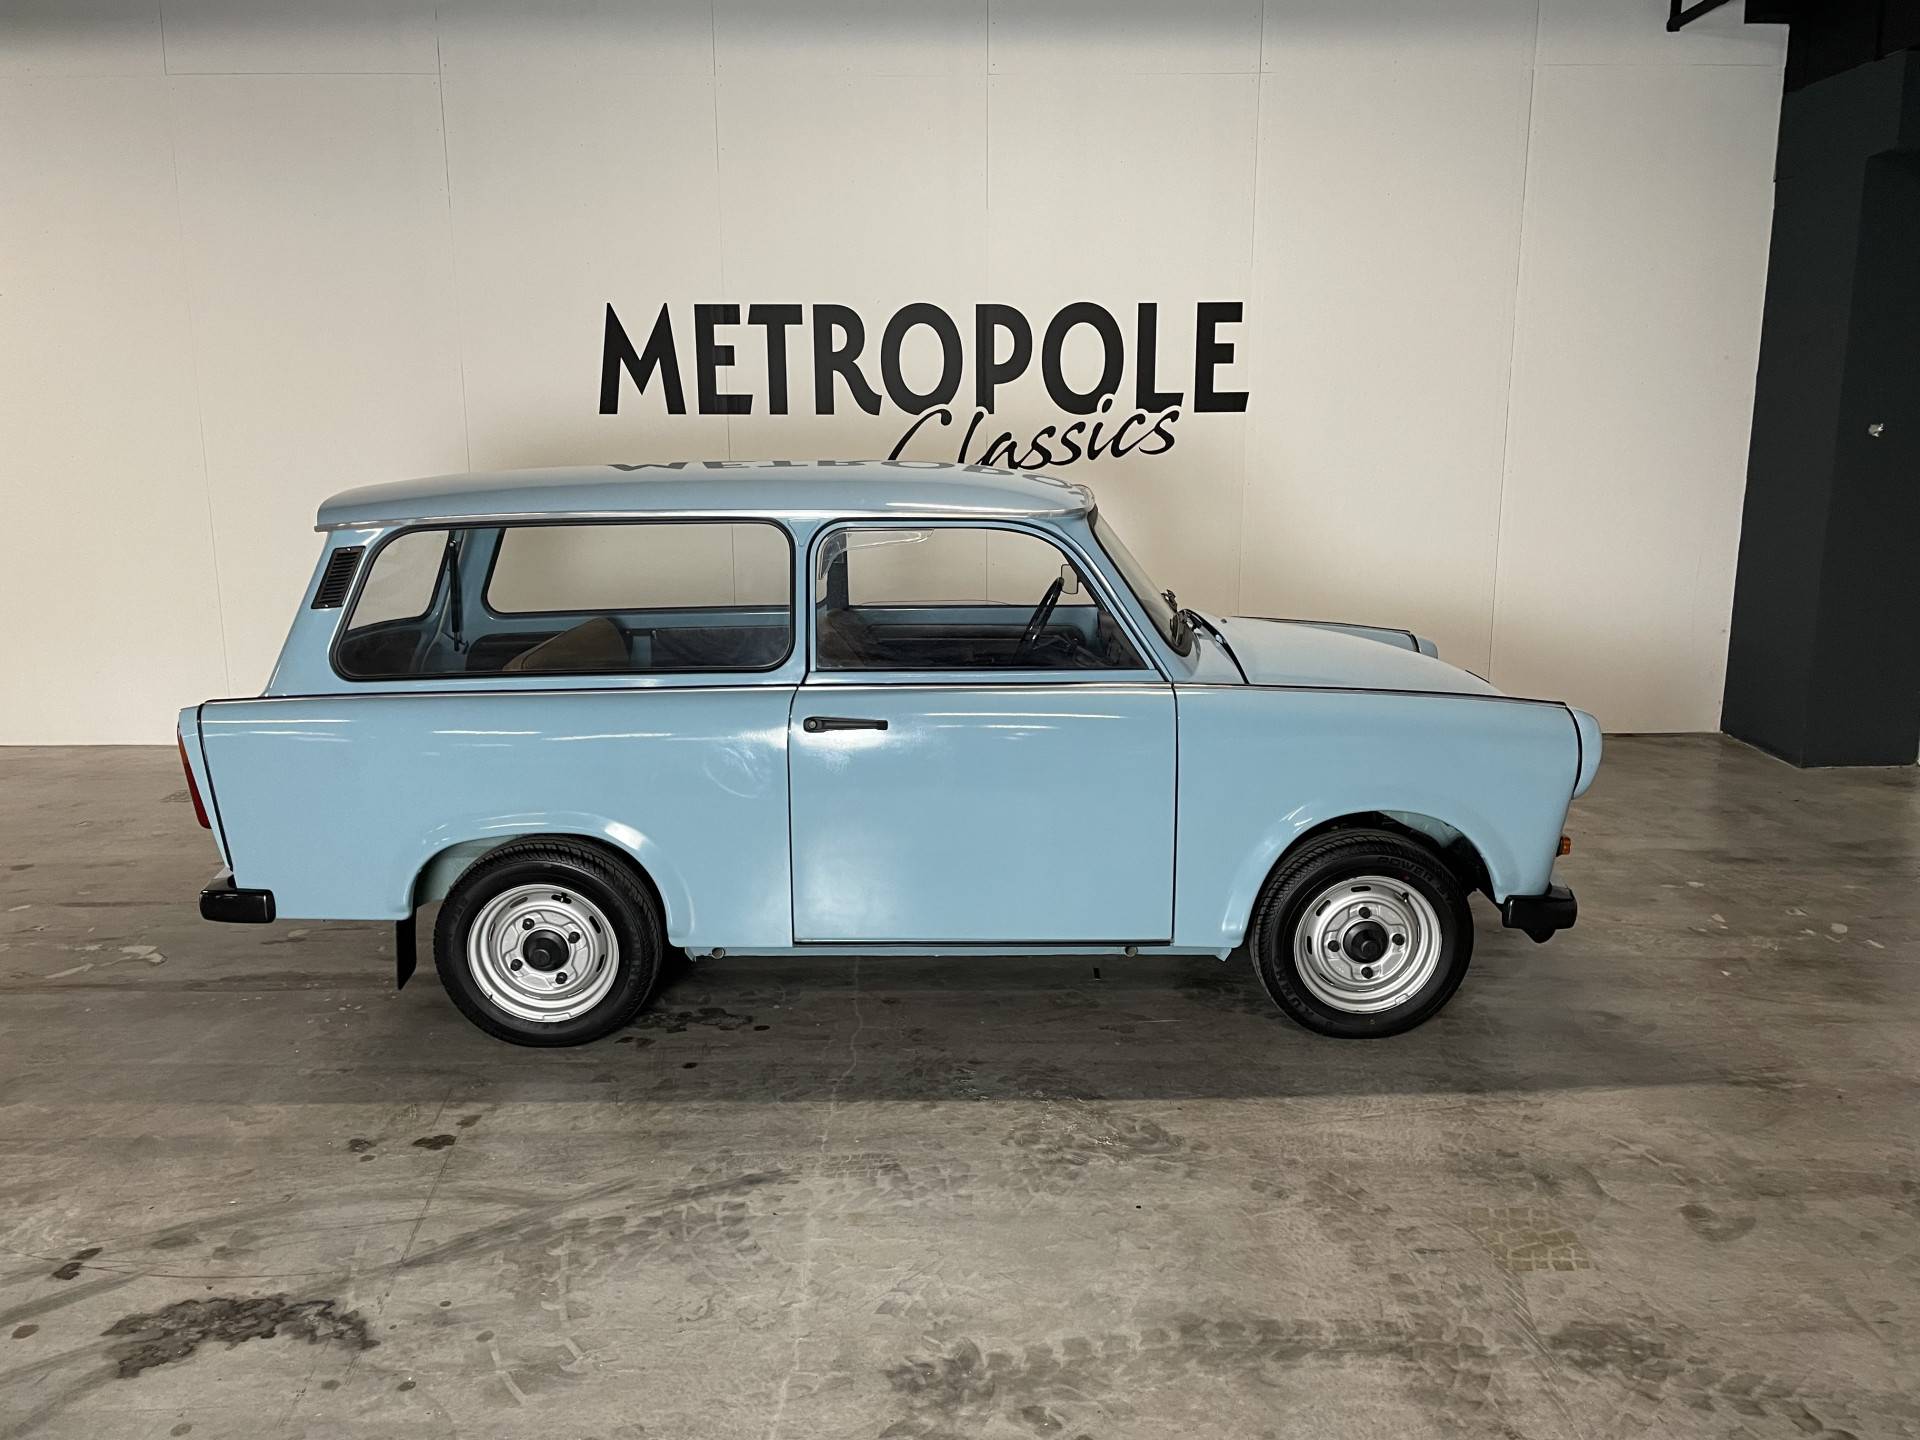 For Sale: Trabant 601 S de Luxe (1989) offered for $16,391